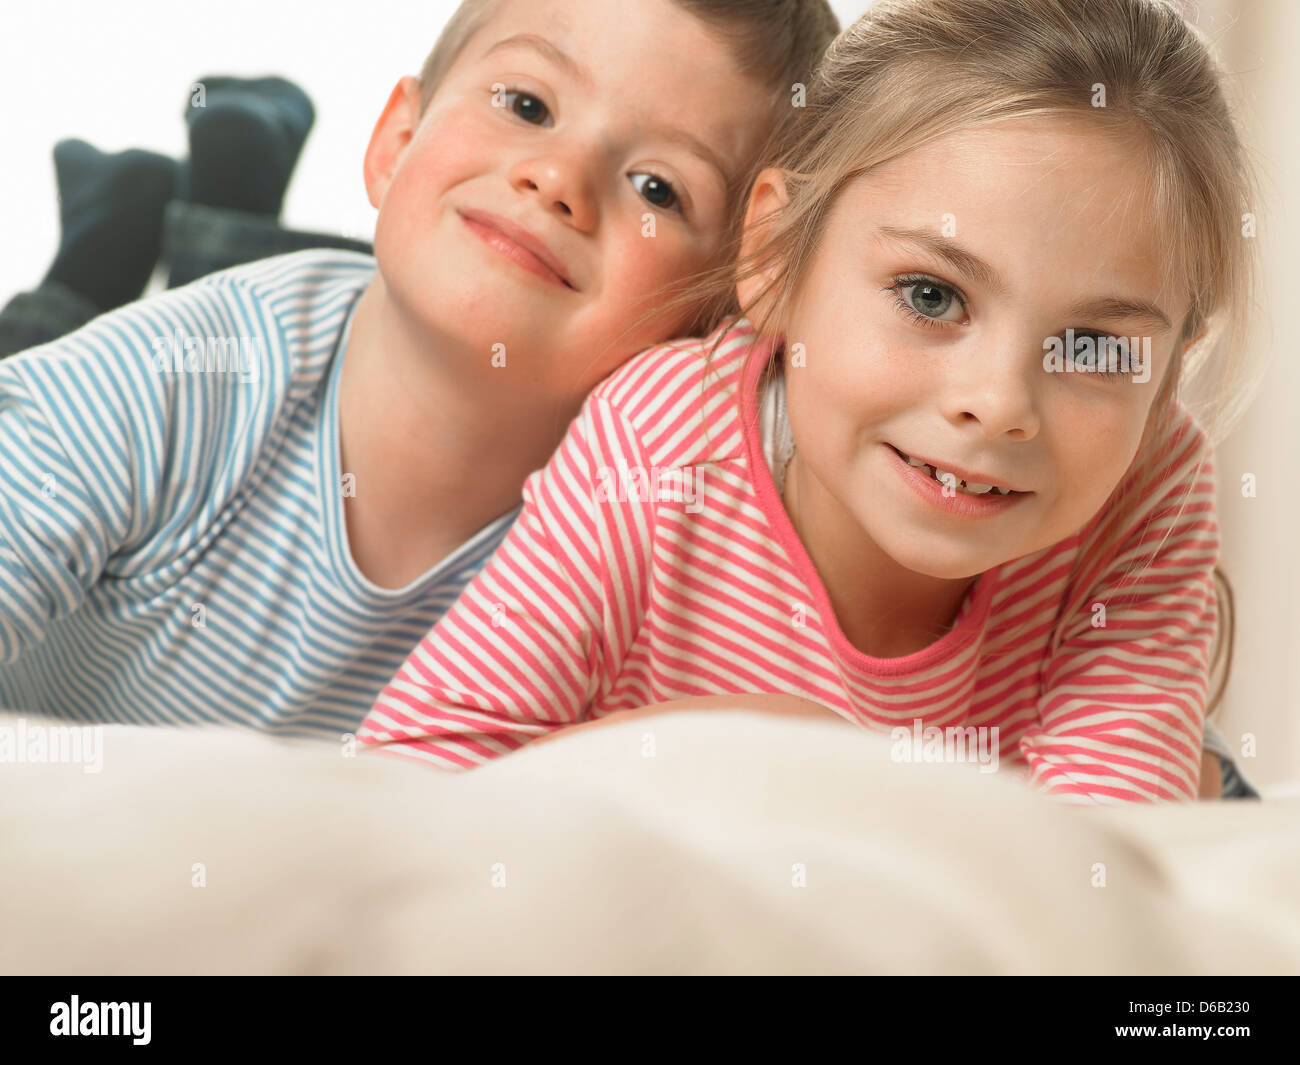 Children laughing together on bed Stock Photo